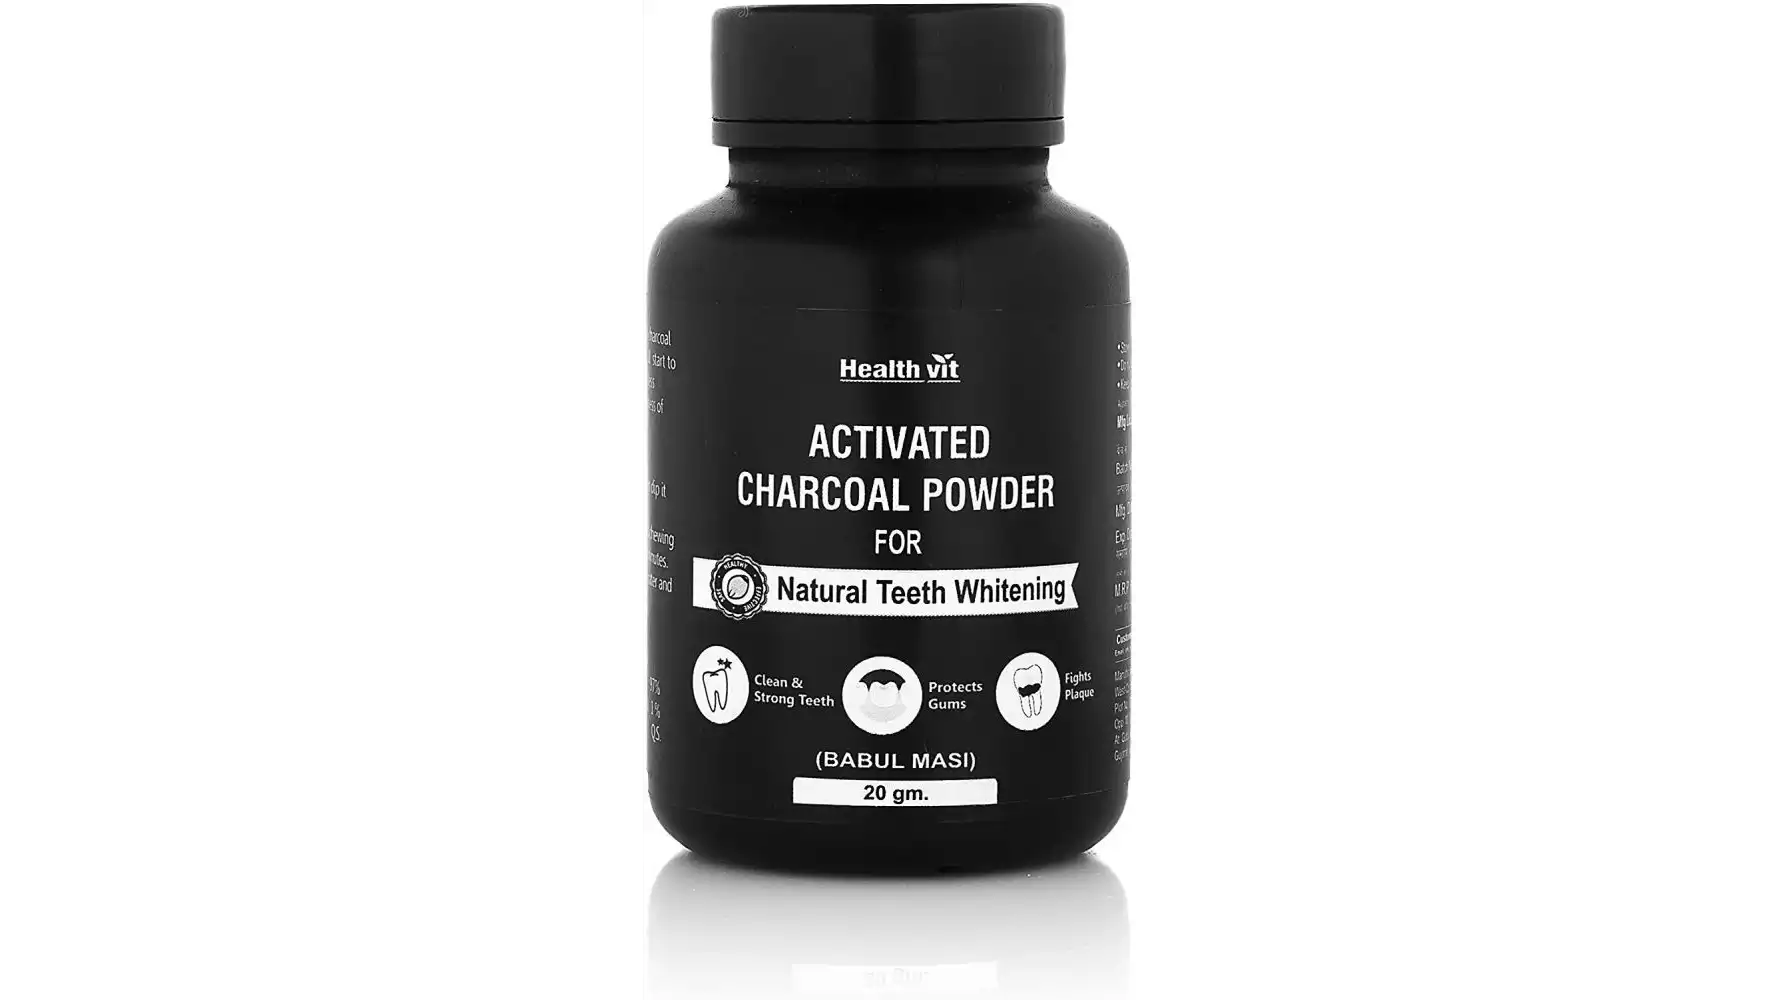 Healthvit Activated Charcoal Powder For Natural Teeth Whitening (20g)